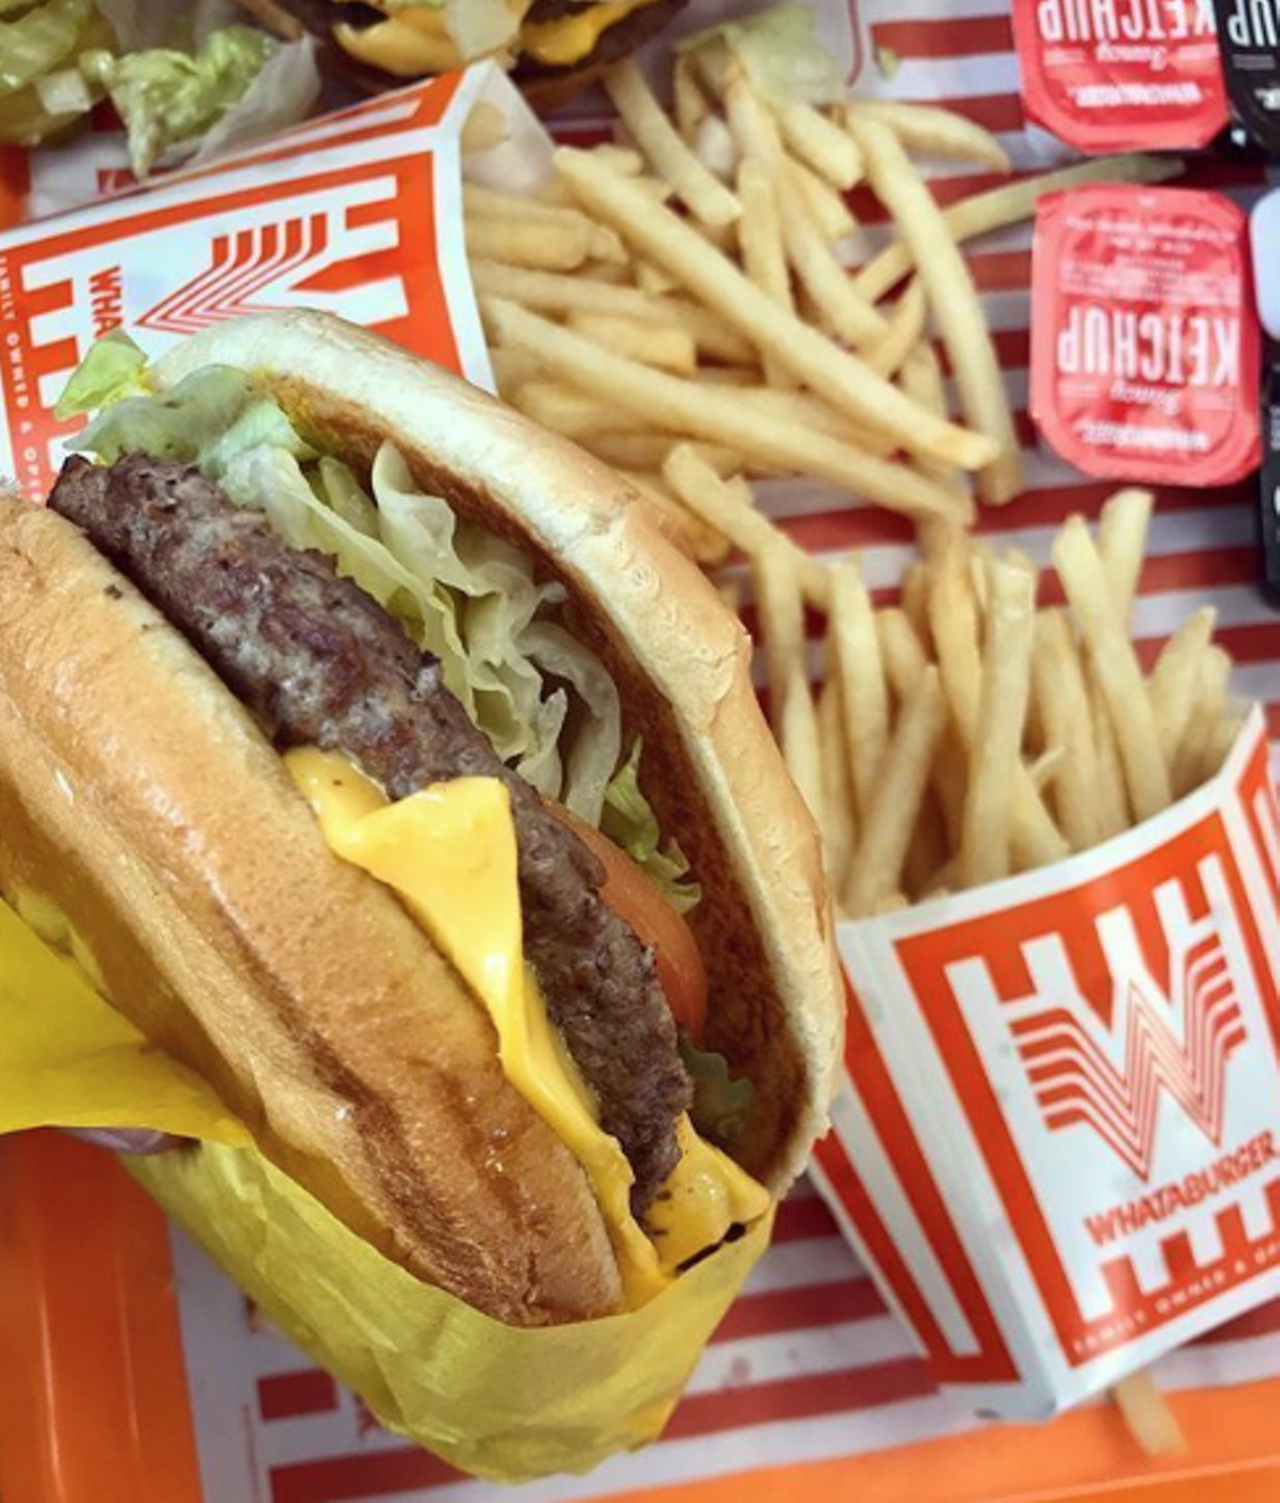 Whataburger
Multiple locations, whataburger.com
Ok, we have one exception to the aforementioned fancy-places-only rule. If you feel like keeping it simple with a burger, you might as well stop by one of the numerous chain locations and score a free Justaburger (after signing up for email alerts).
Photo via Instagram / ww_jessdoit